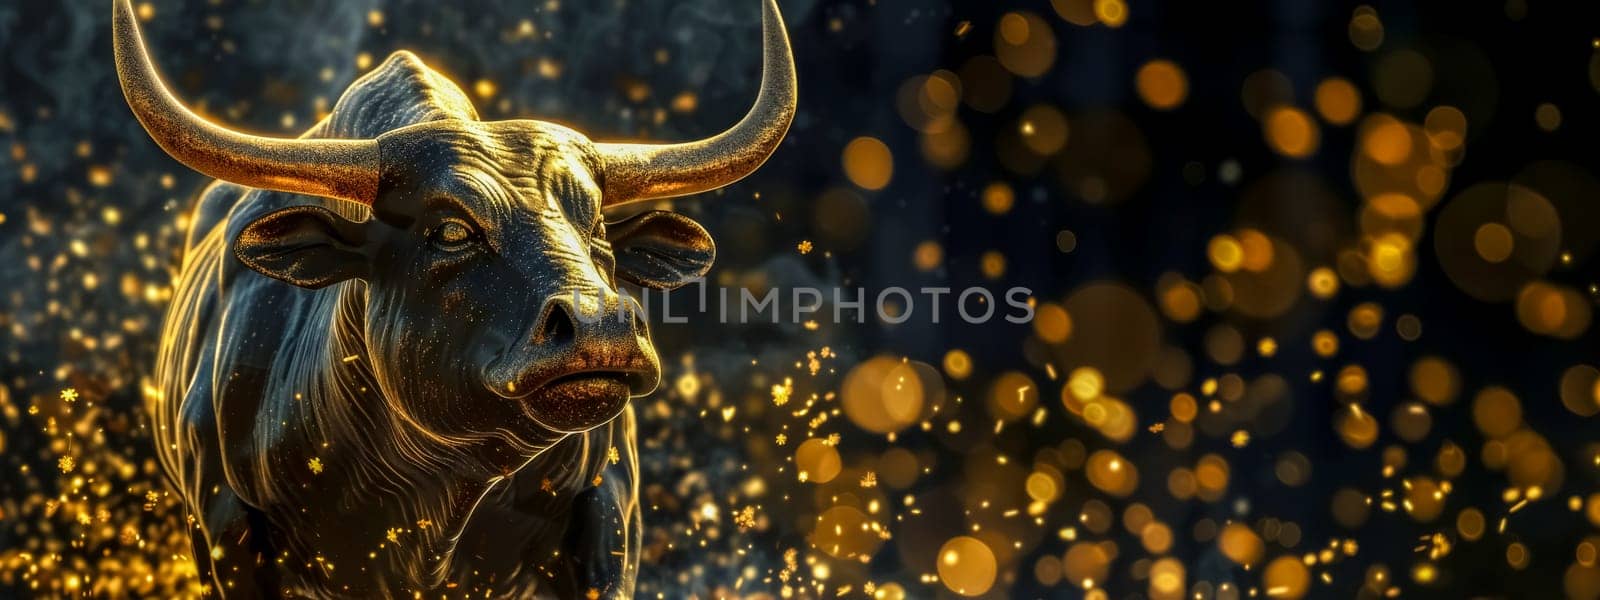 Golden bull with sparkling bokeh background by Edophoto